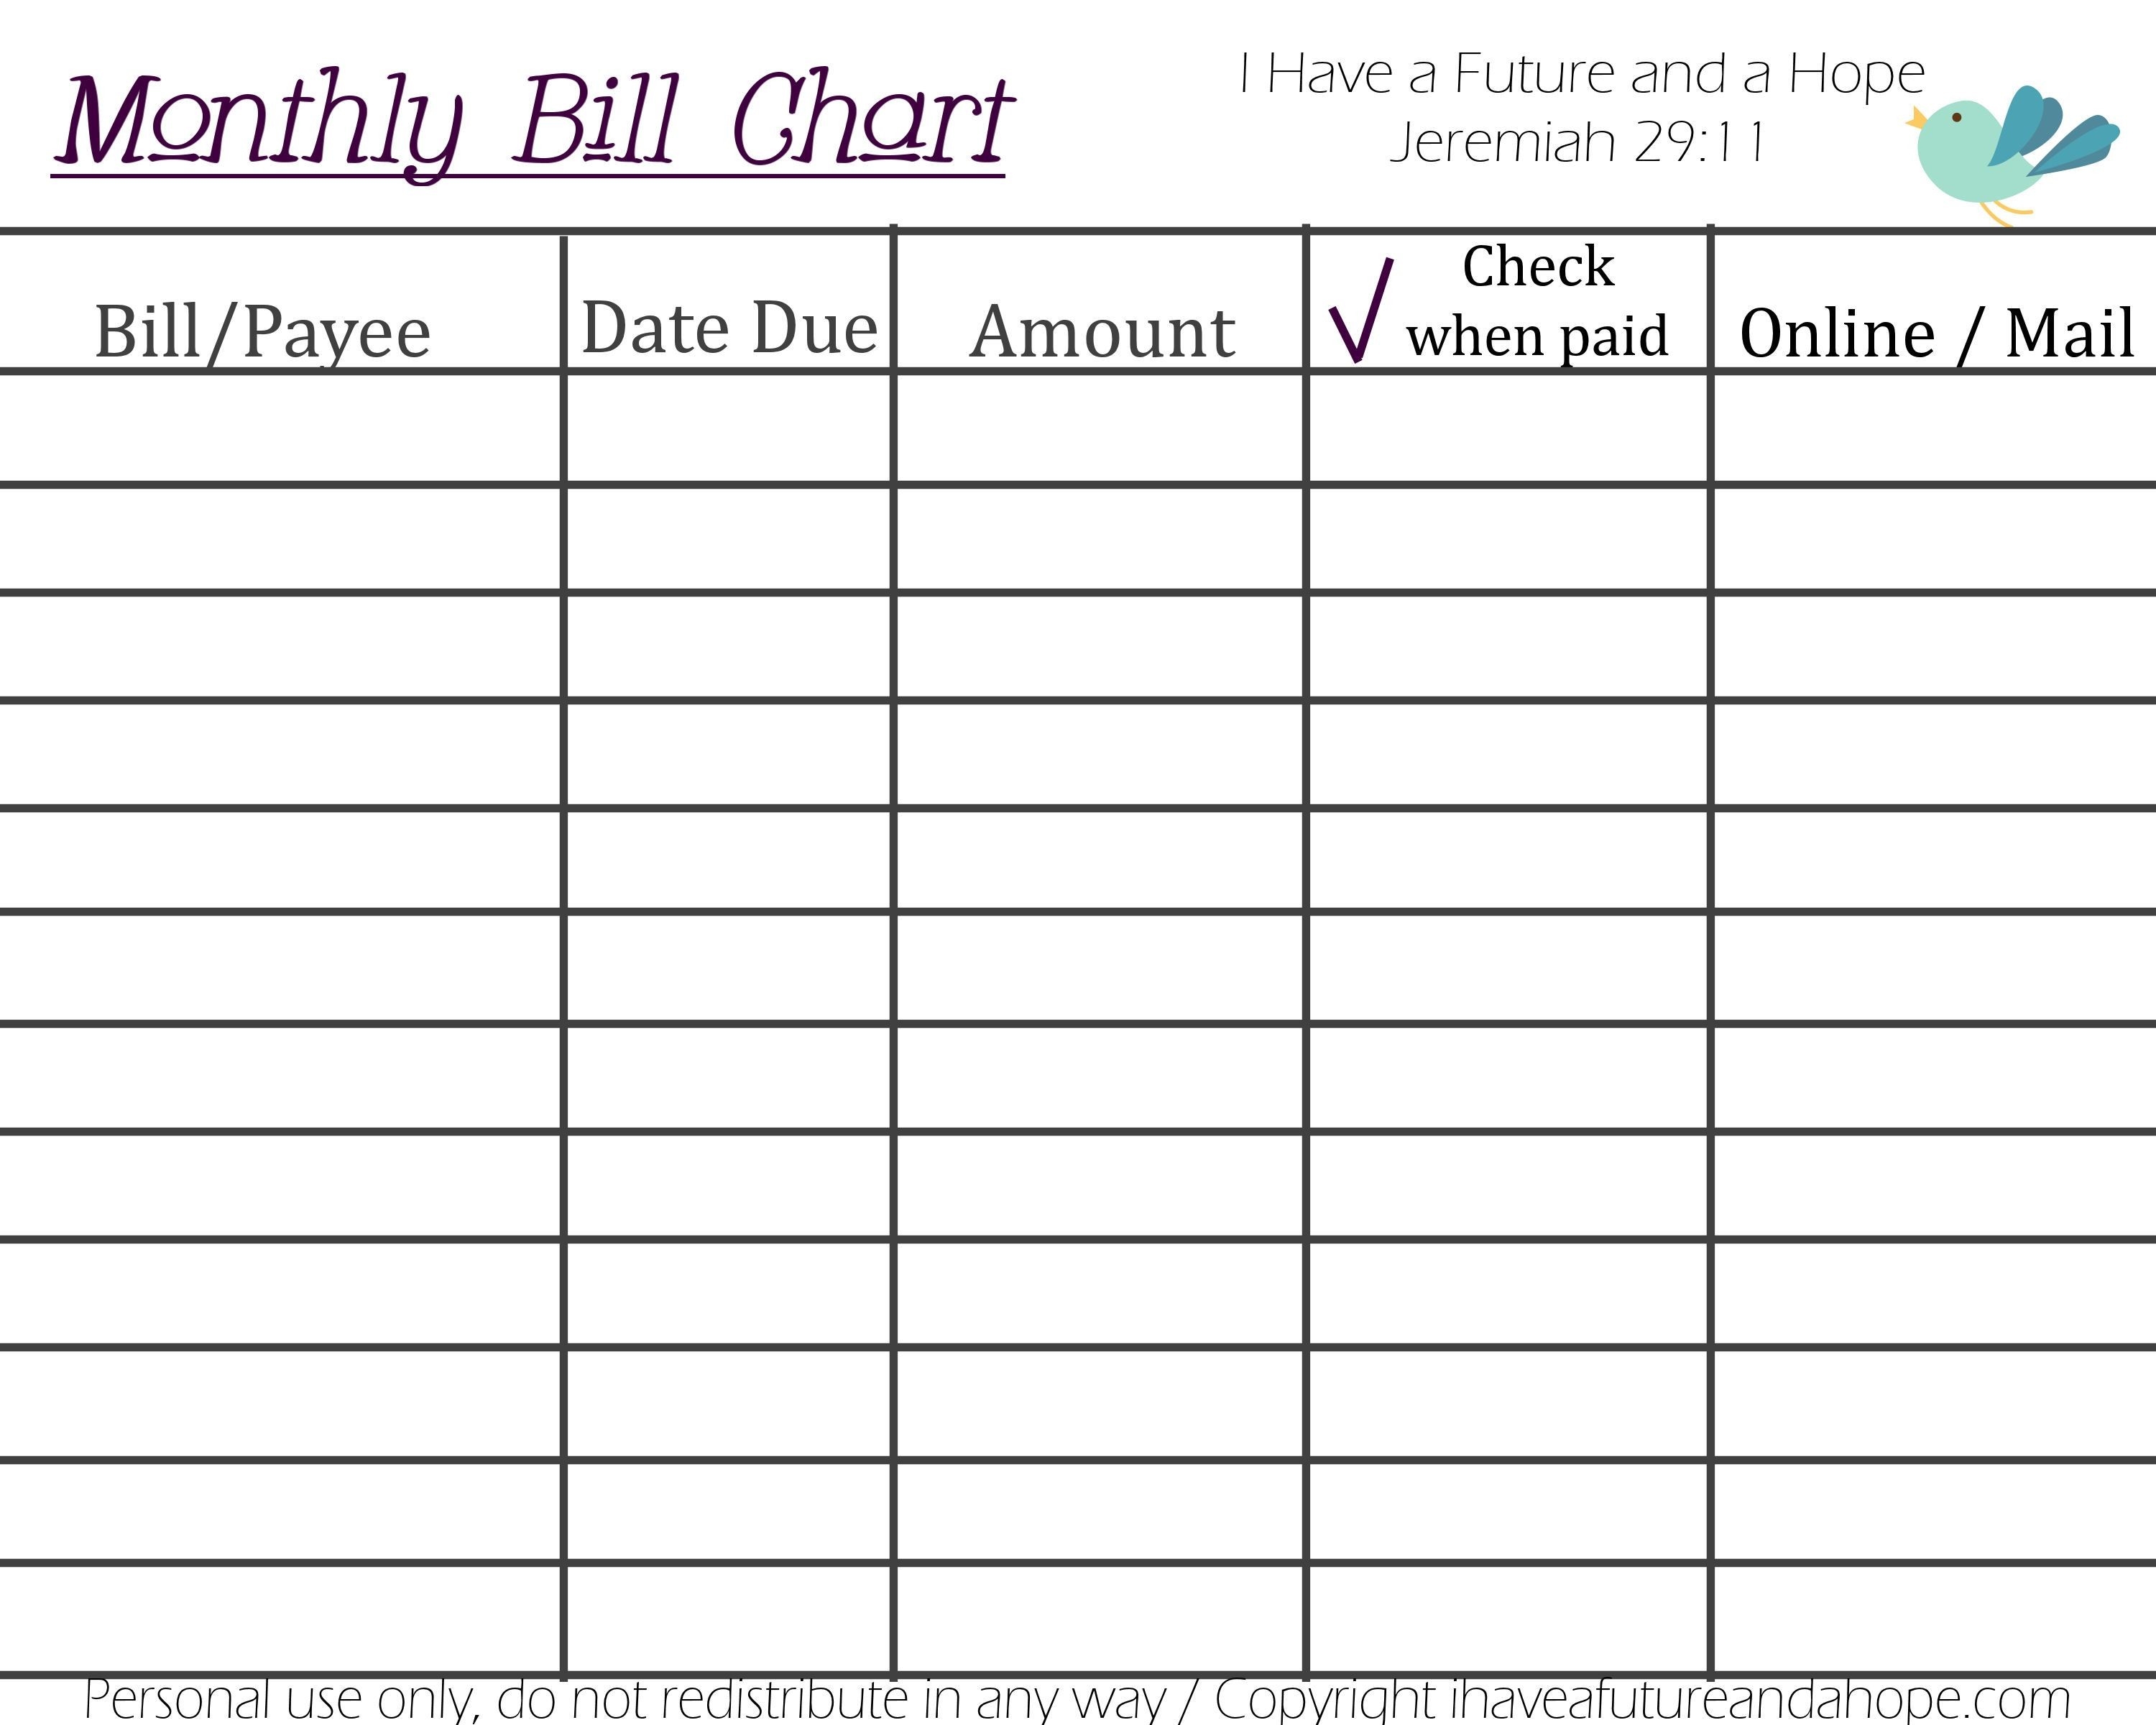 Printable Monthly Bill Chart | Budgeting Ideas | Bill-Blank Chart For Monthly Bills